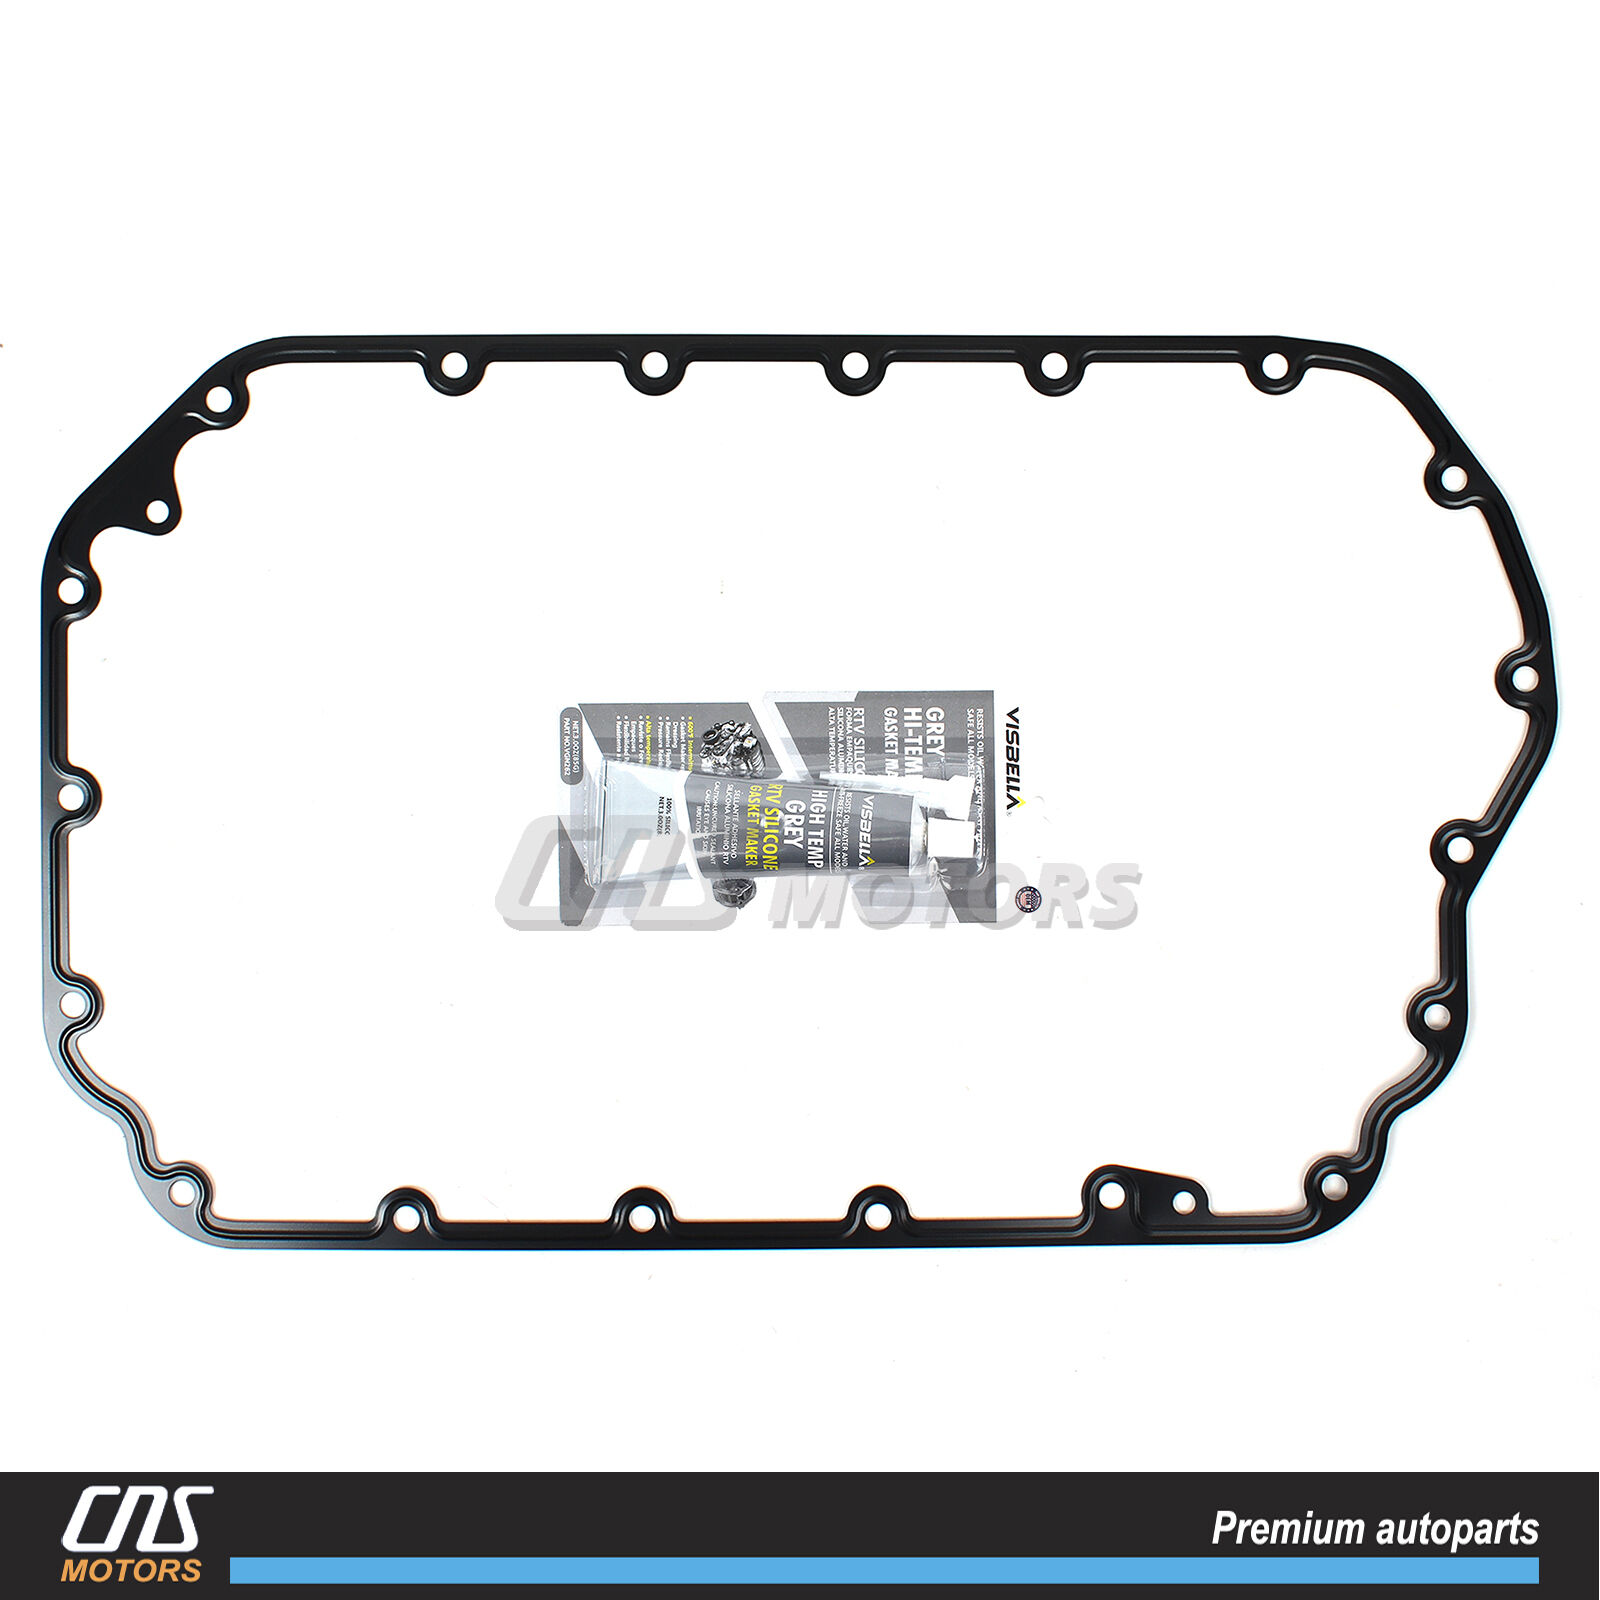 Metal Oil Pan Gasket & Silicone for 98-05 Audi A4 A6 AllRoad Cabriolet S4 Passat